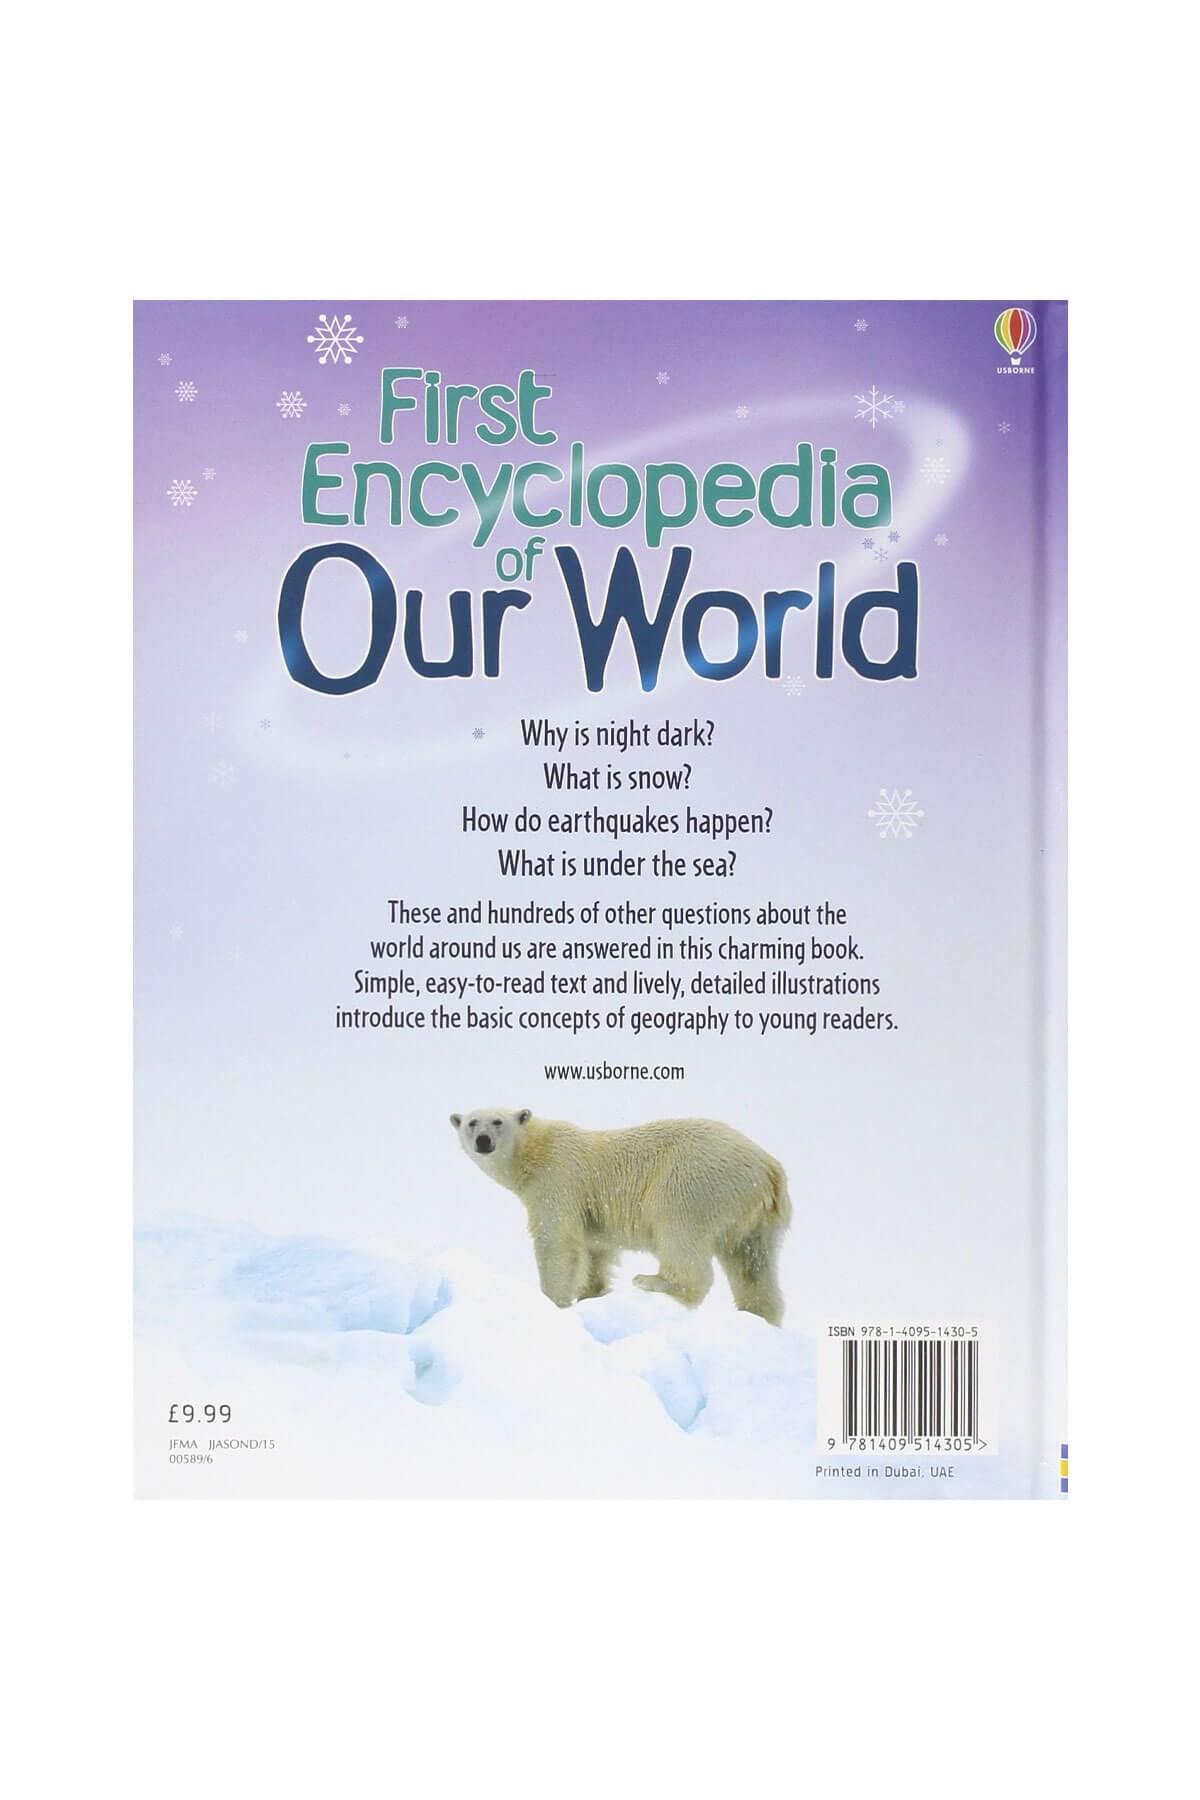 The Usborne First Encyclopedia Our World